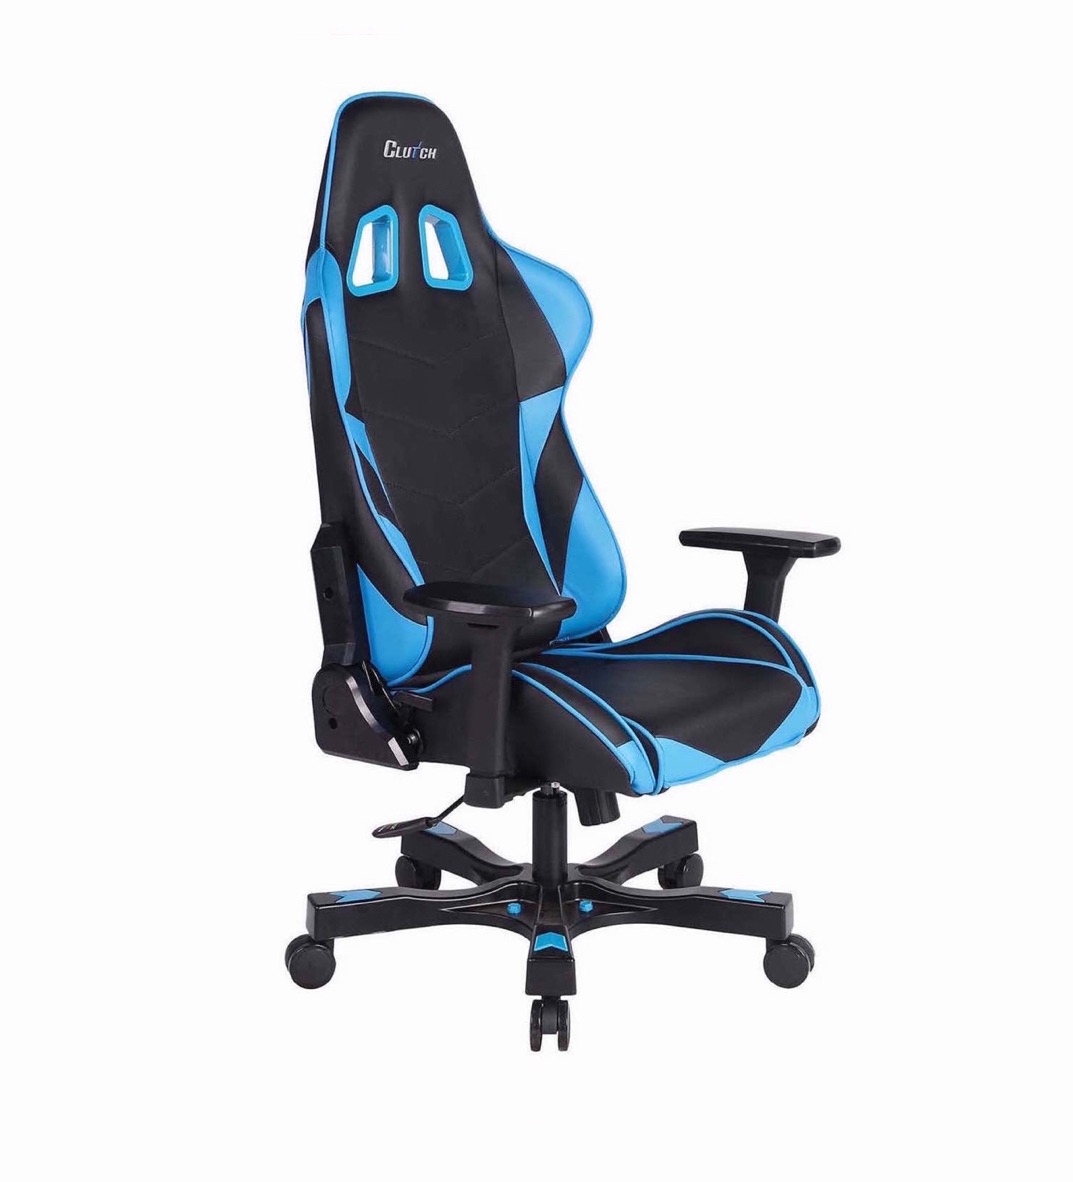  Review  Clutch  Chairz  Crank Charlie Gaming Chair Best 